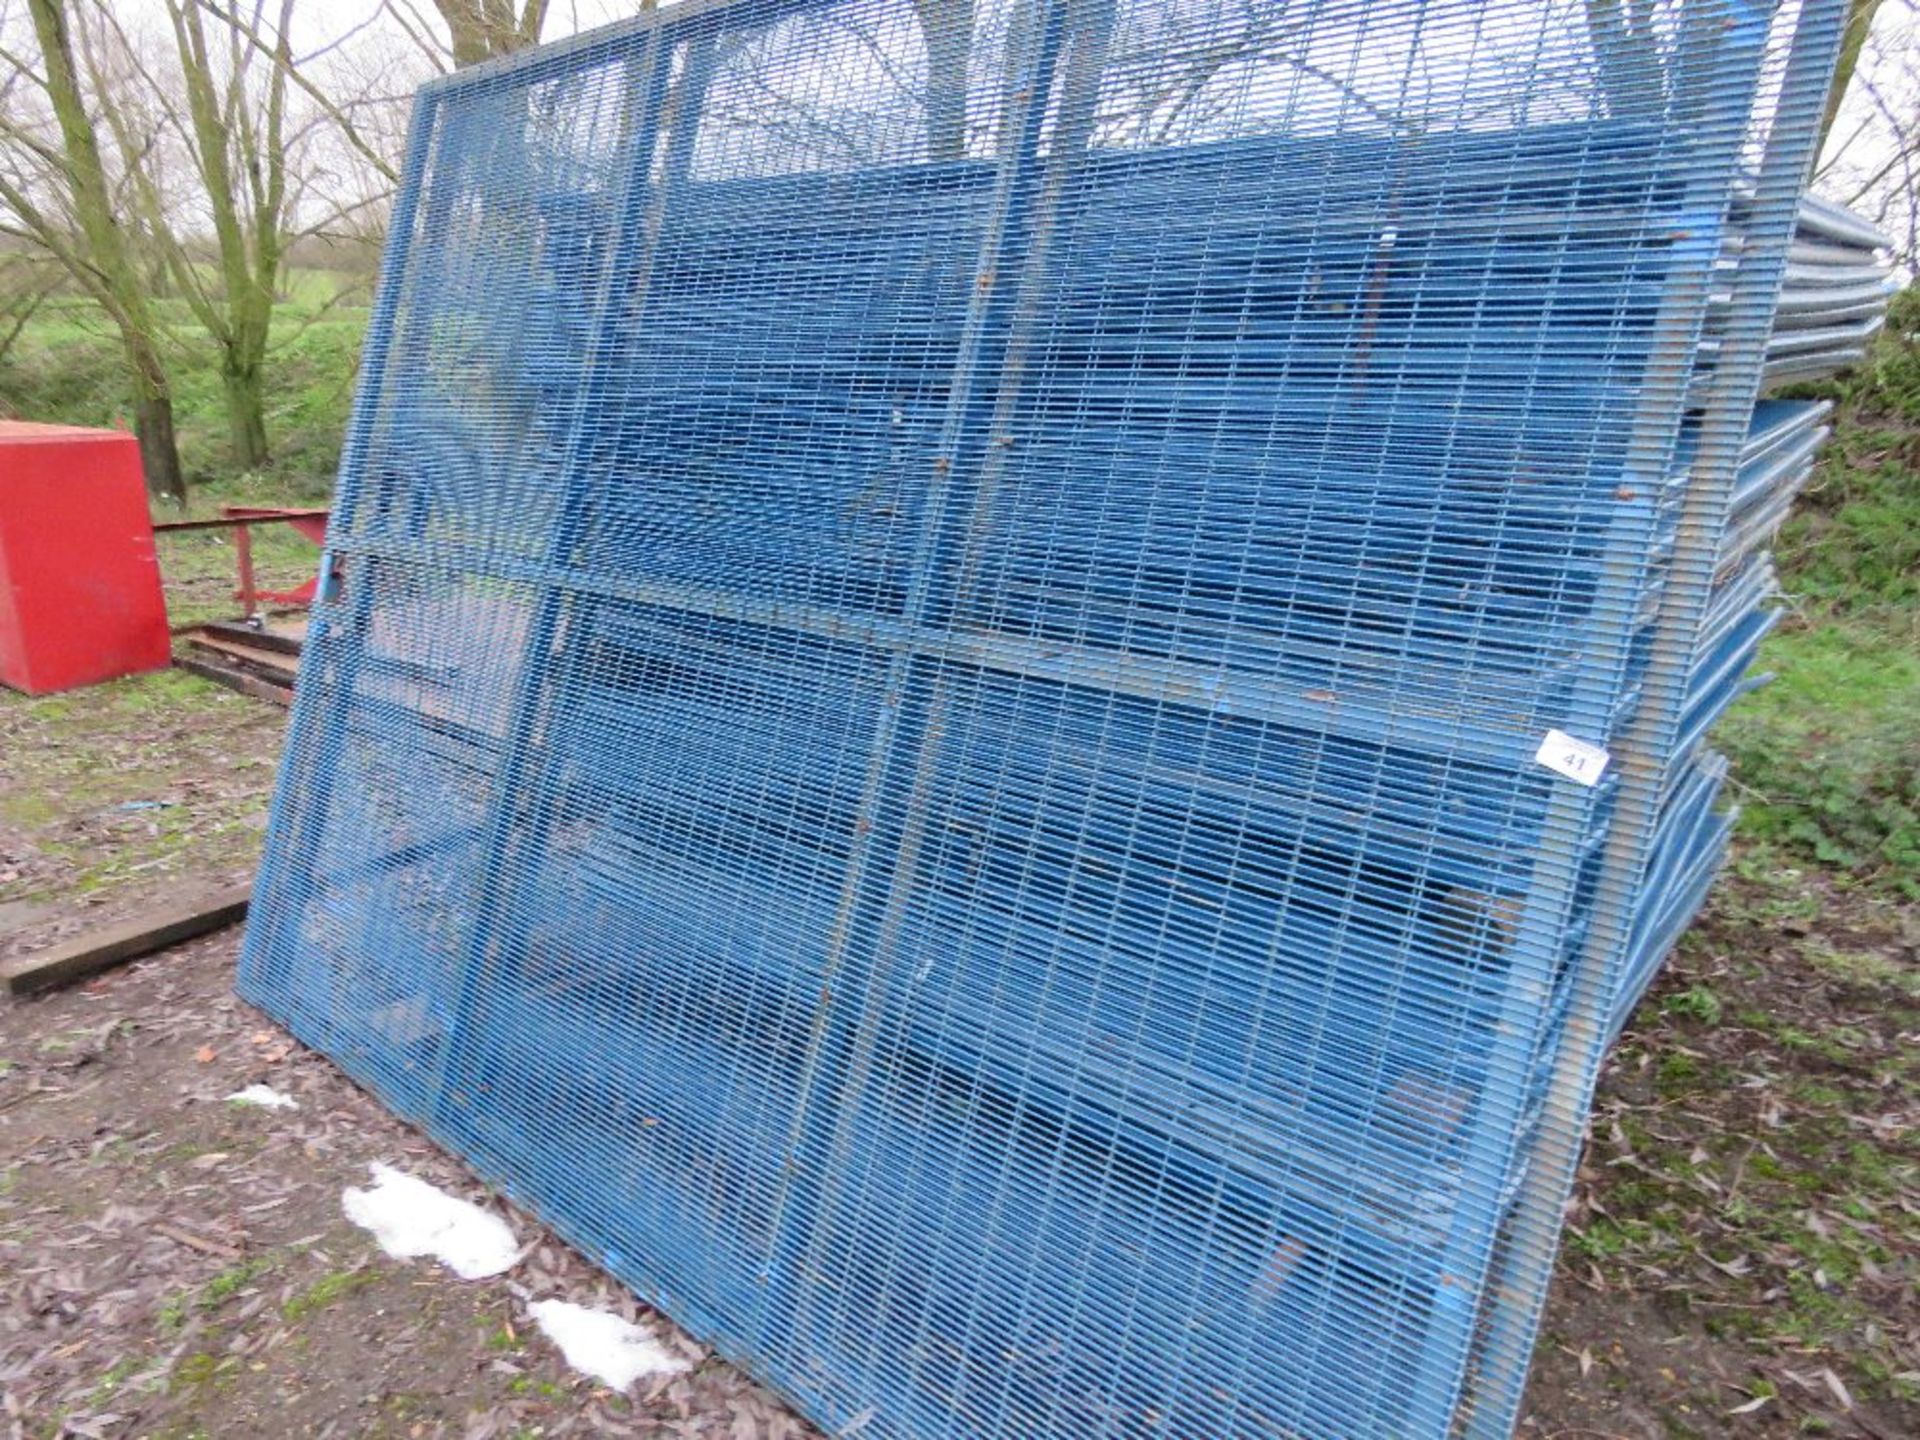 SECURITY COMPOUND EXTRA HEAVY DUTY ANTI CLIMB MESH COVERED FENCE PANELS ALSO POTENTIALLY CAN BE USED - Image 4 of 4